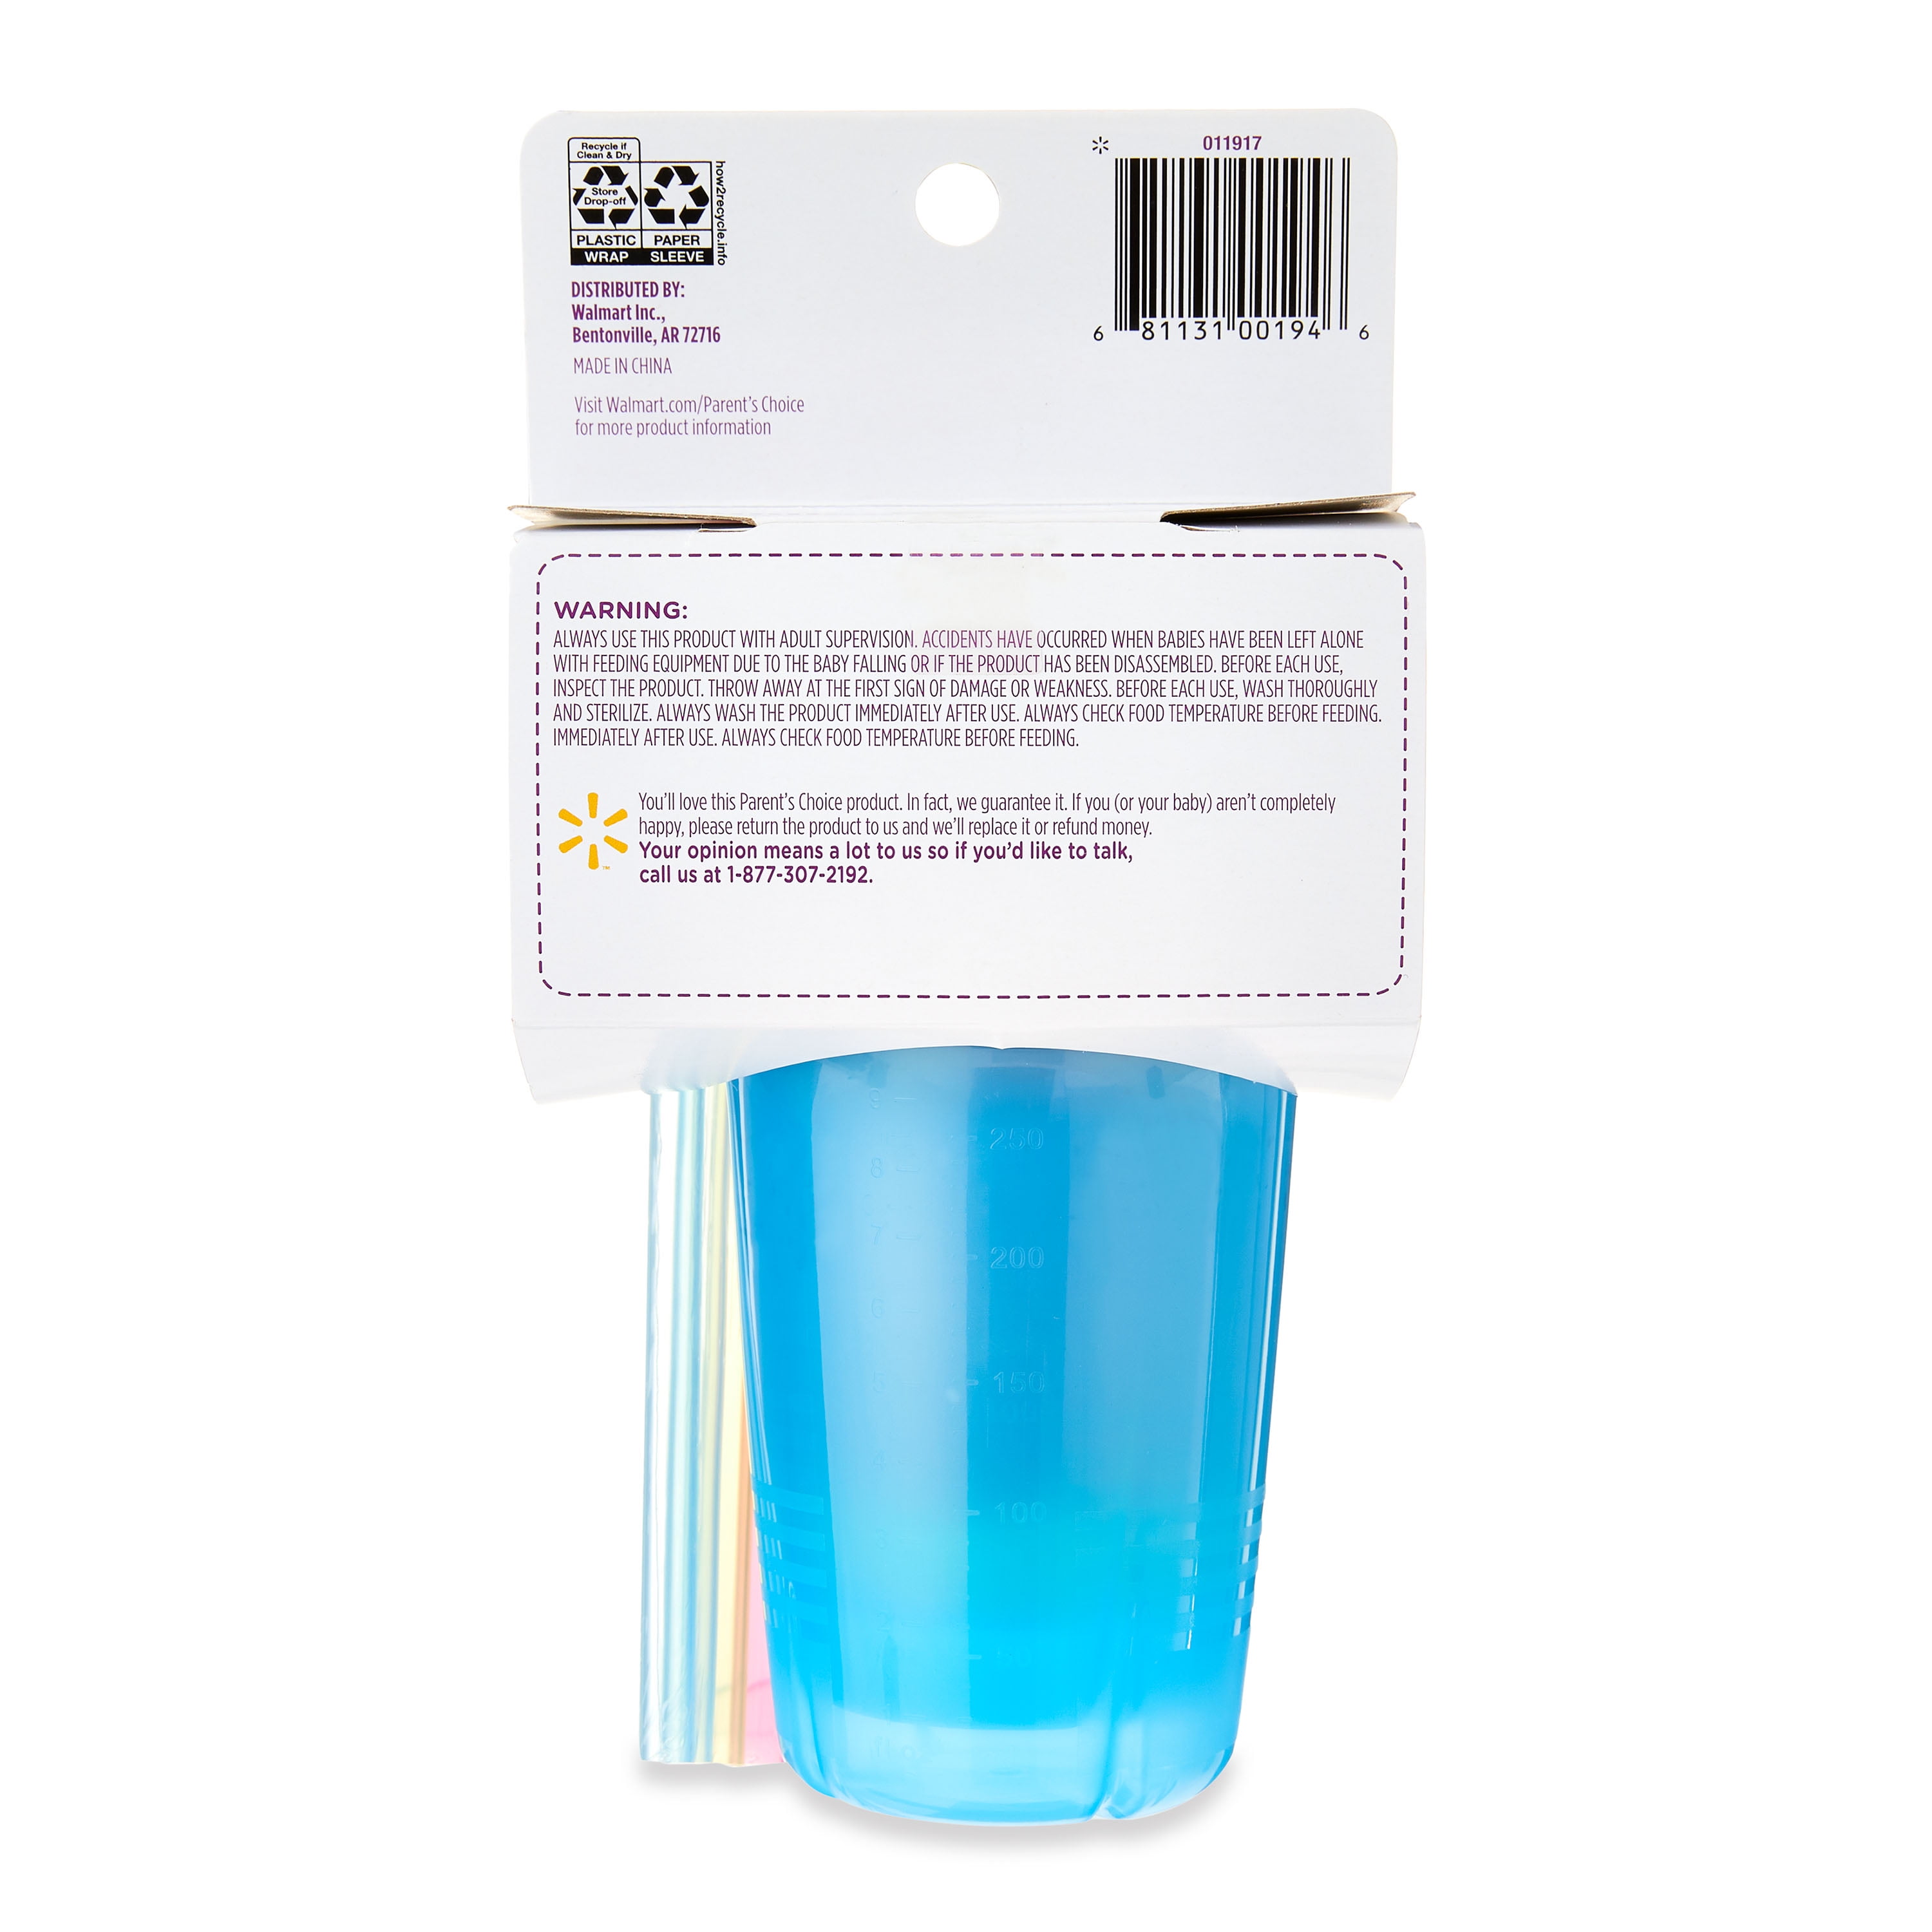 Kids SS Cup/Silicone Sleeve S4, 1 Pack - Kroger